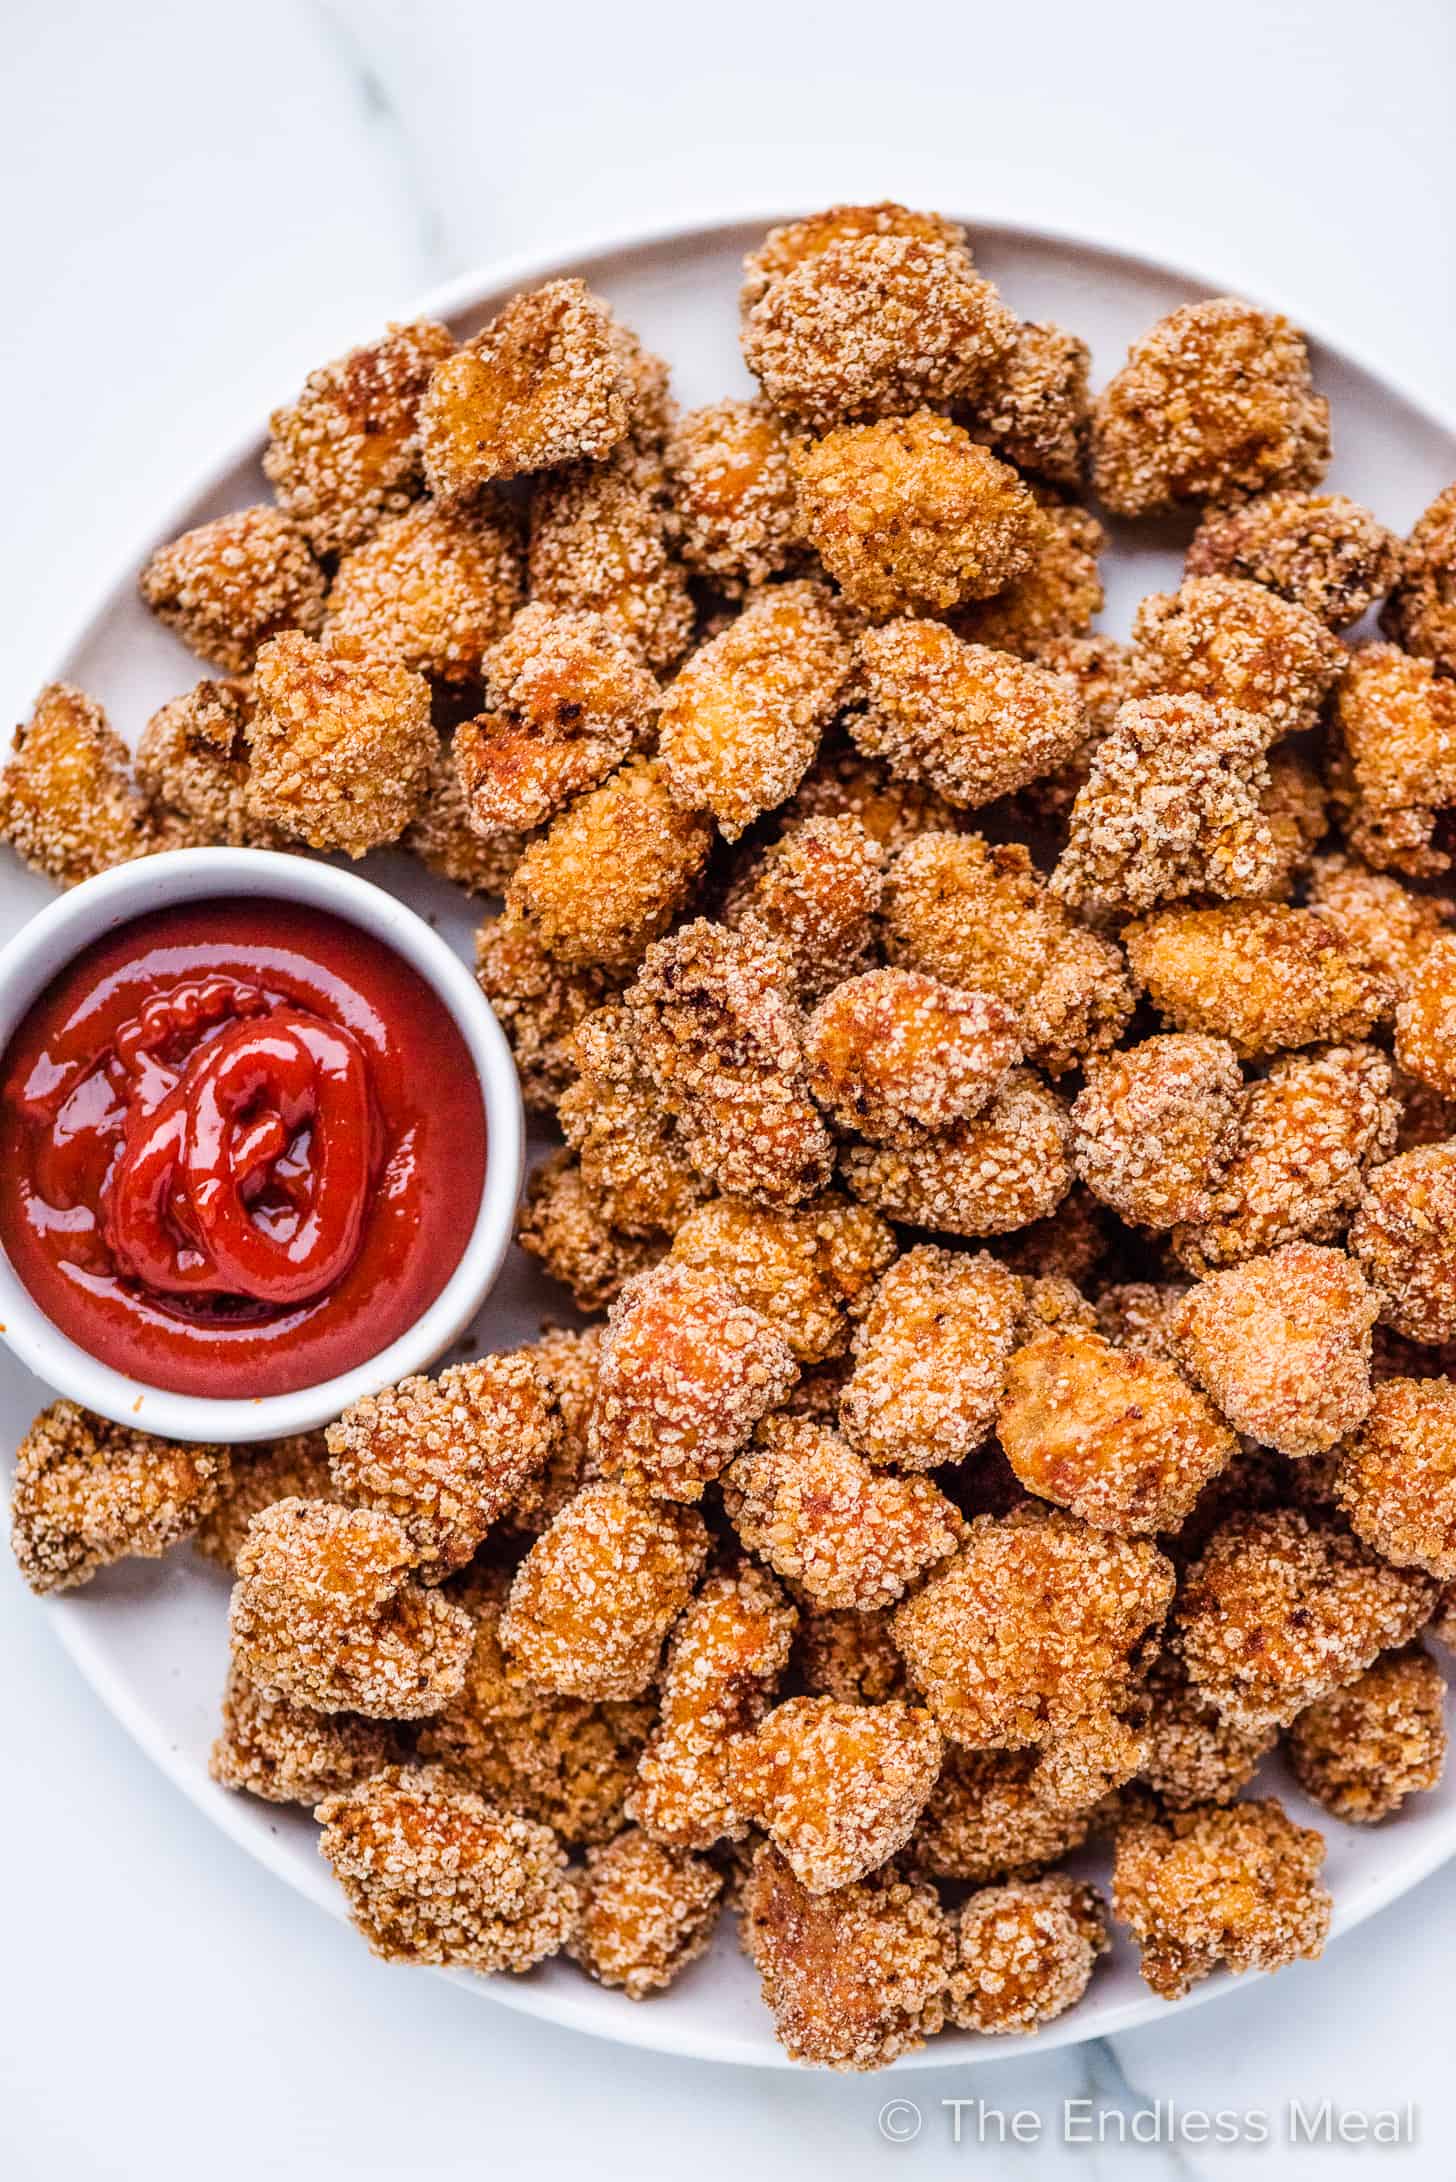 Fried Chicken Bites on a serving platter with ketchup.